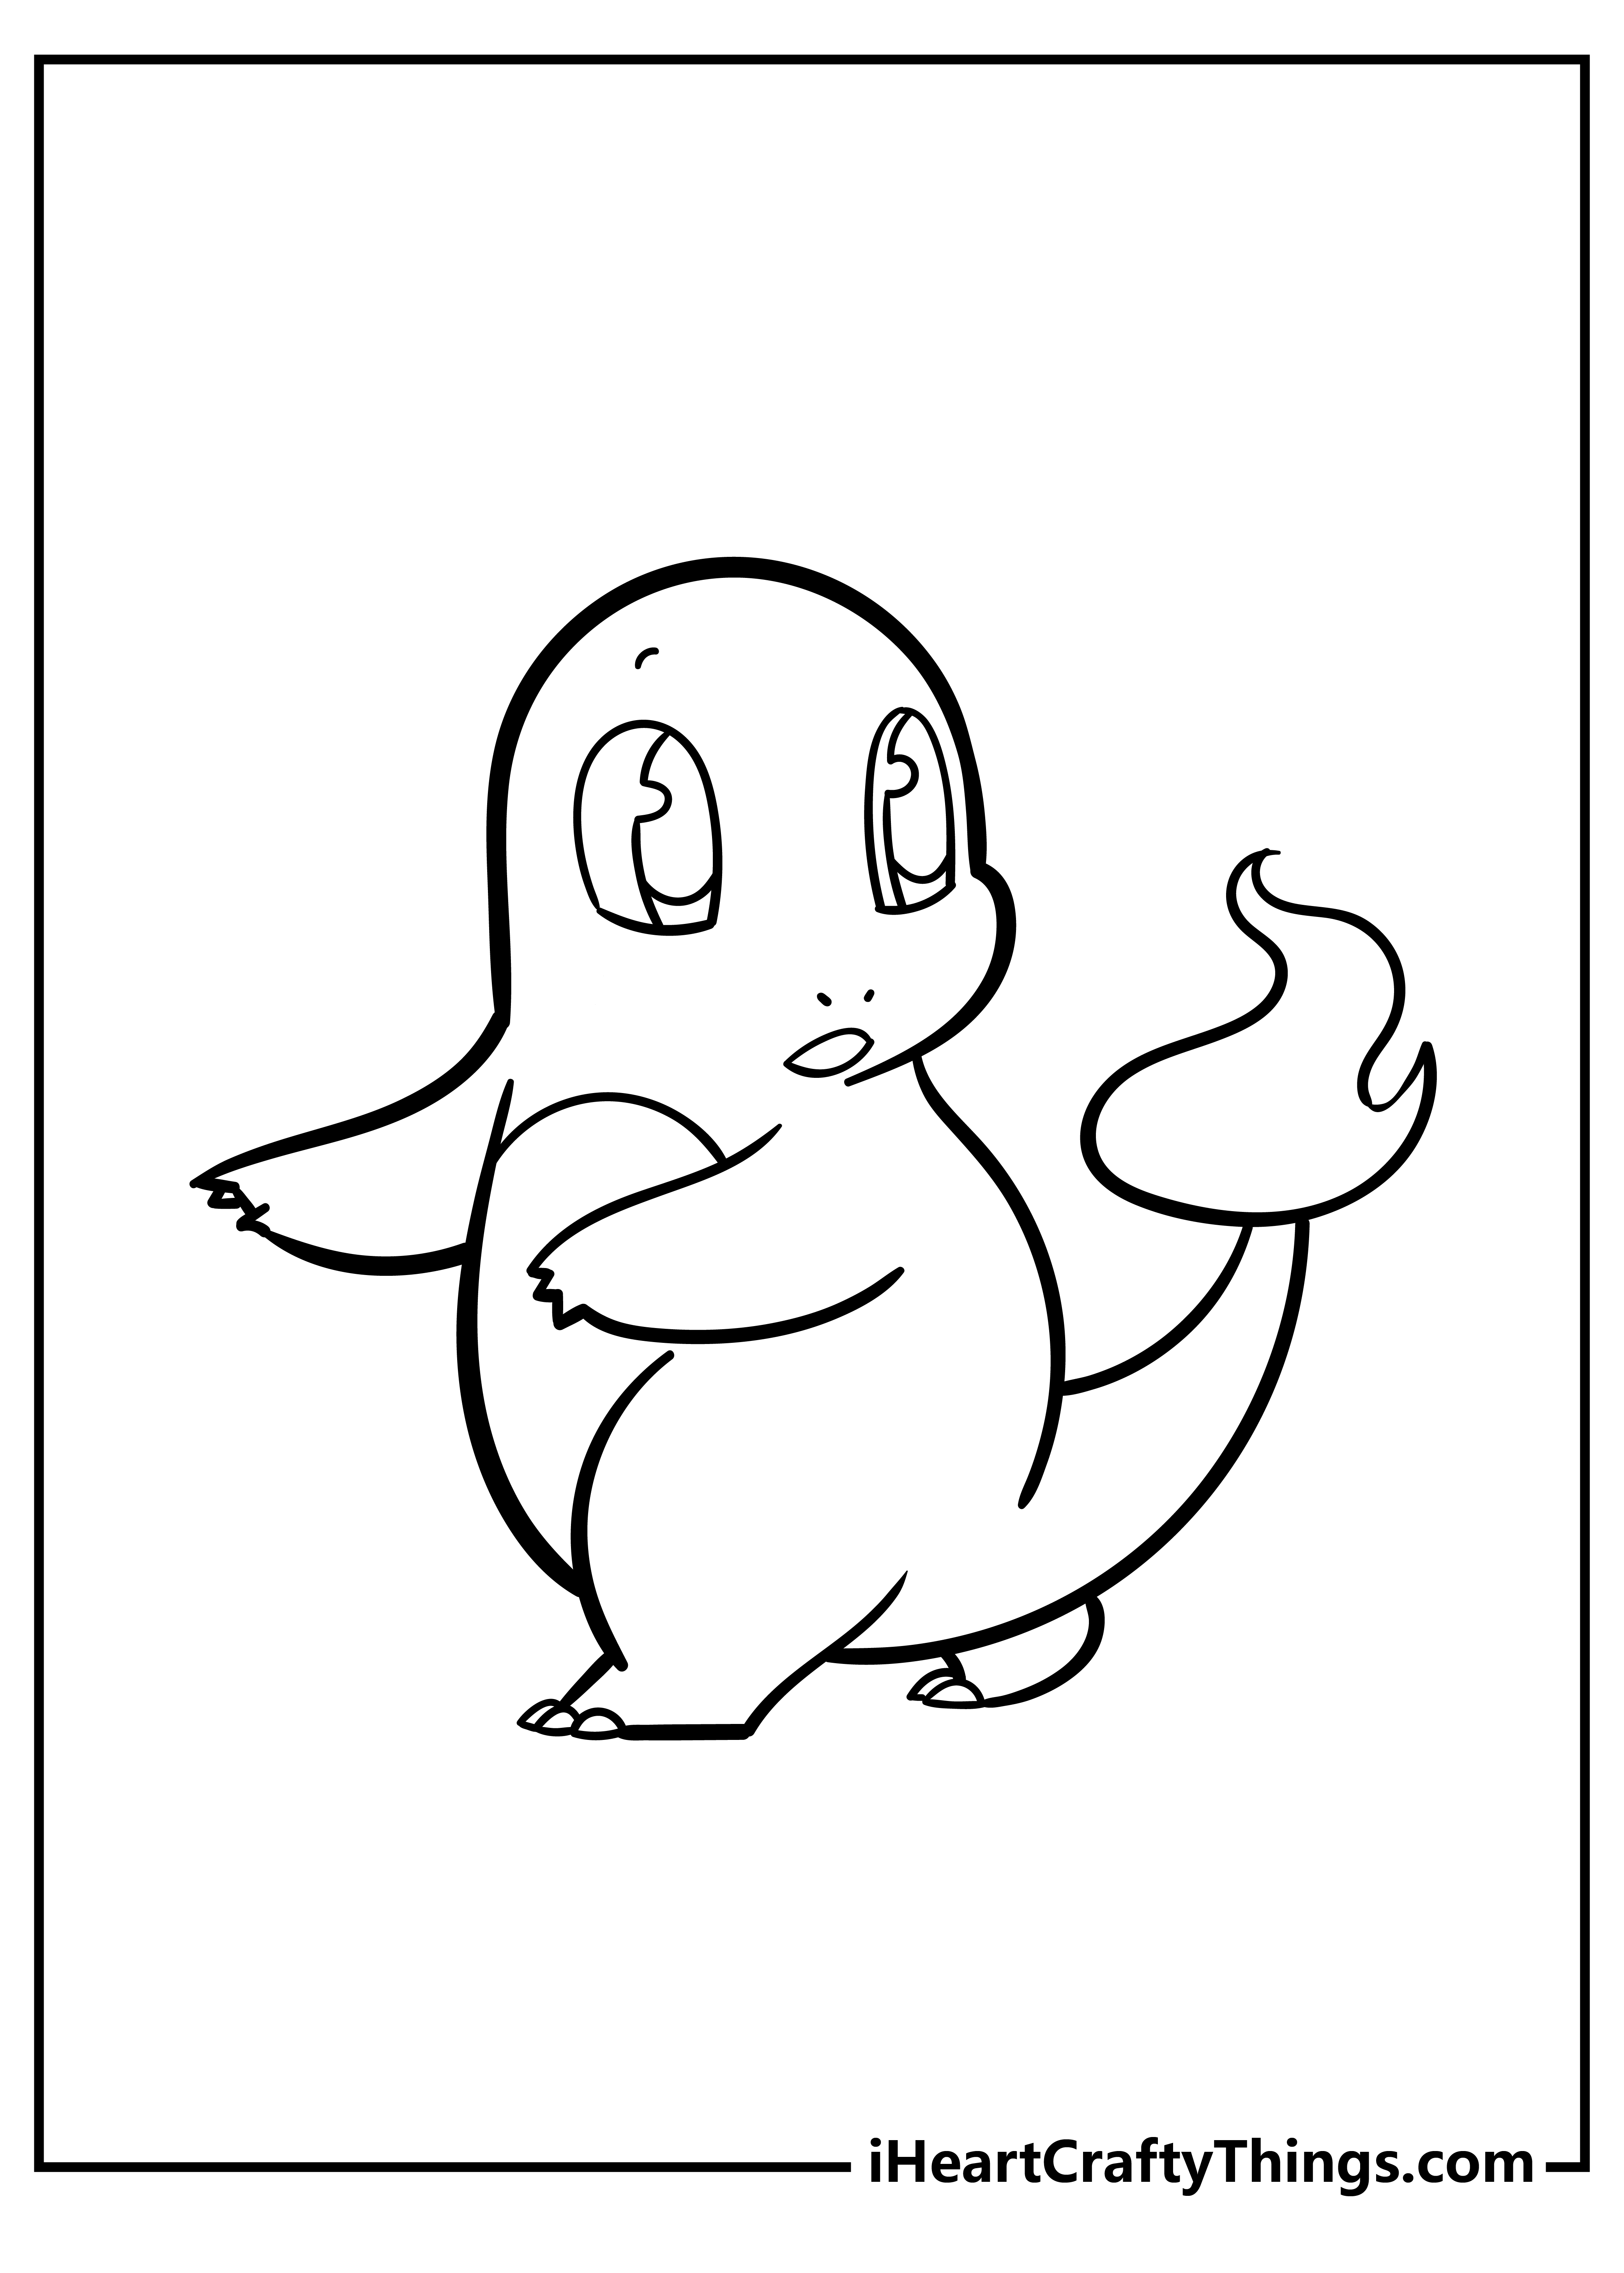 Charmander Coloring Book for adults free download